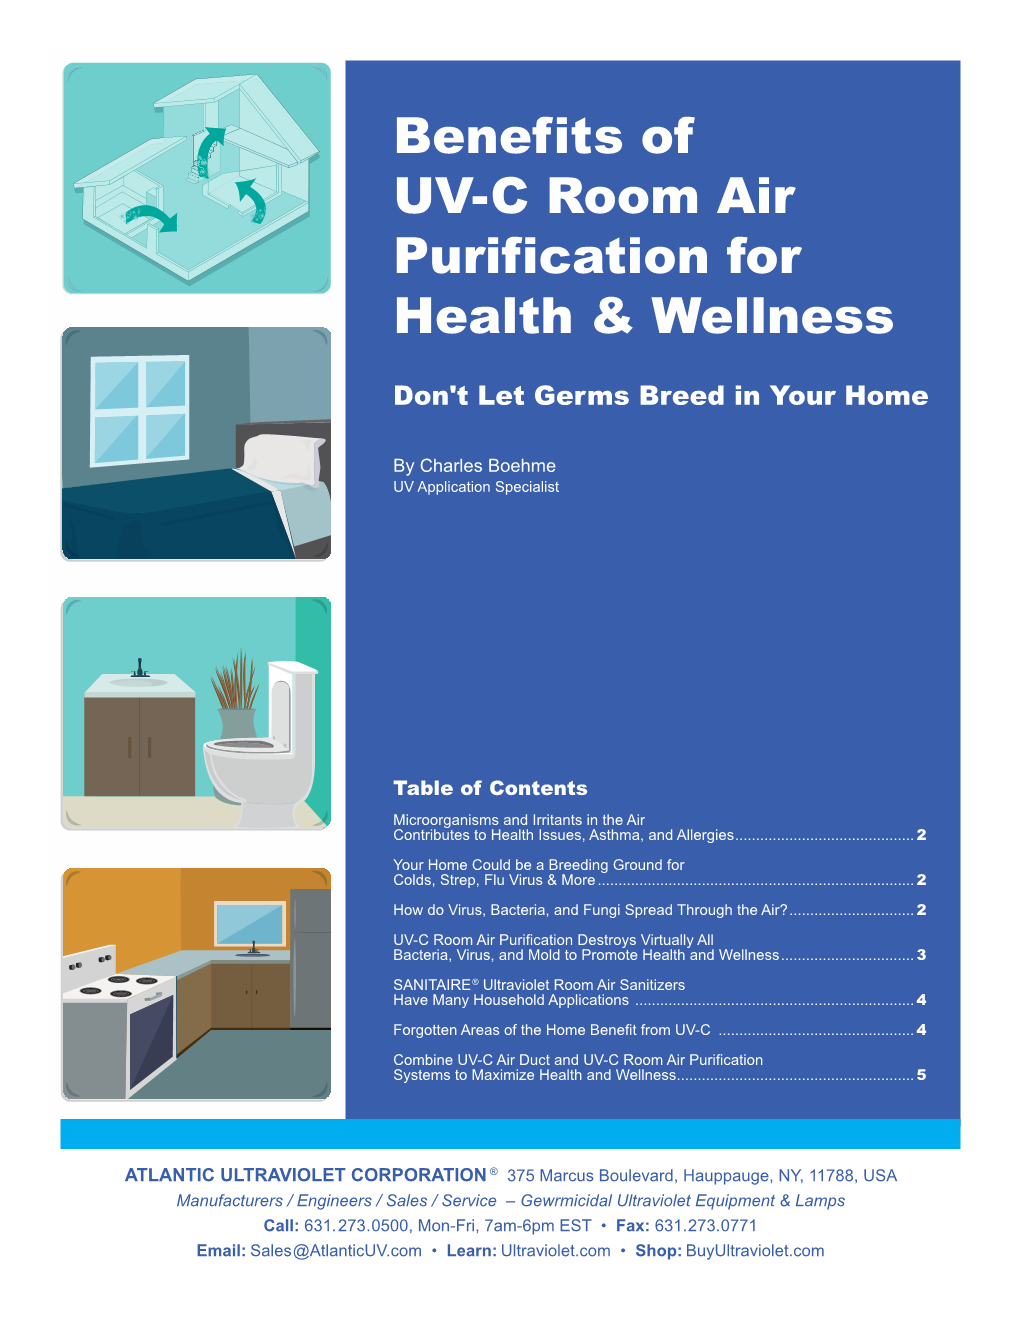 Download Our Room Air Purification Whitepaper